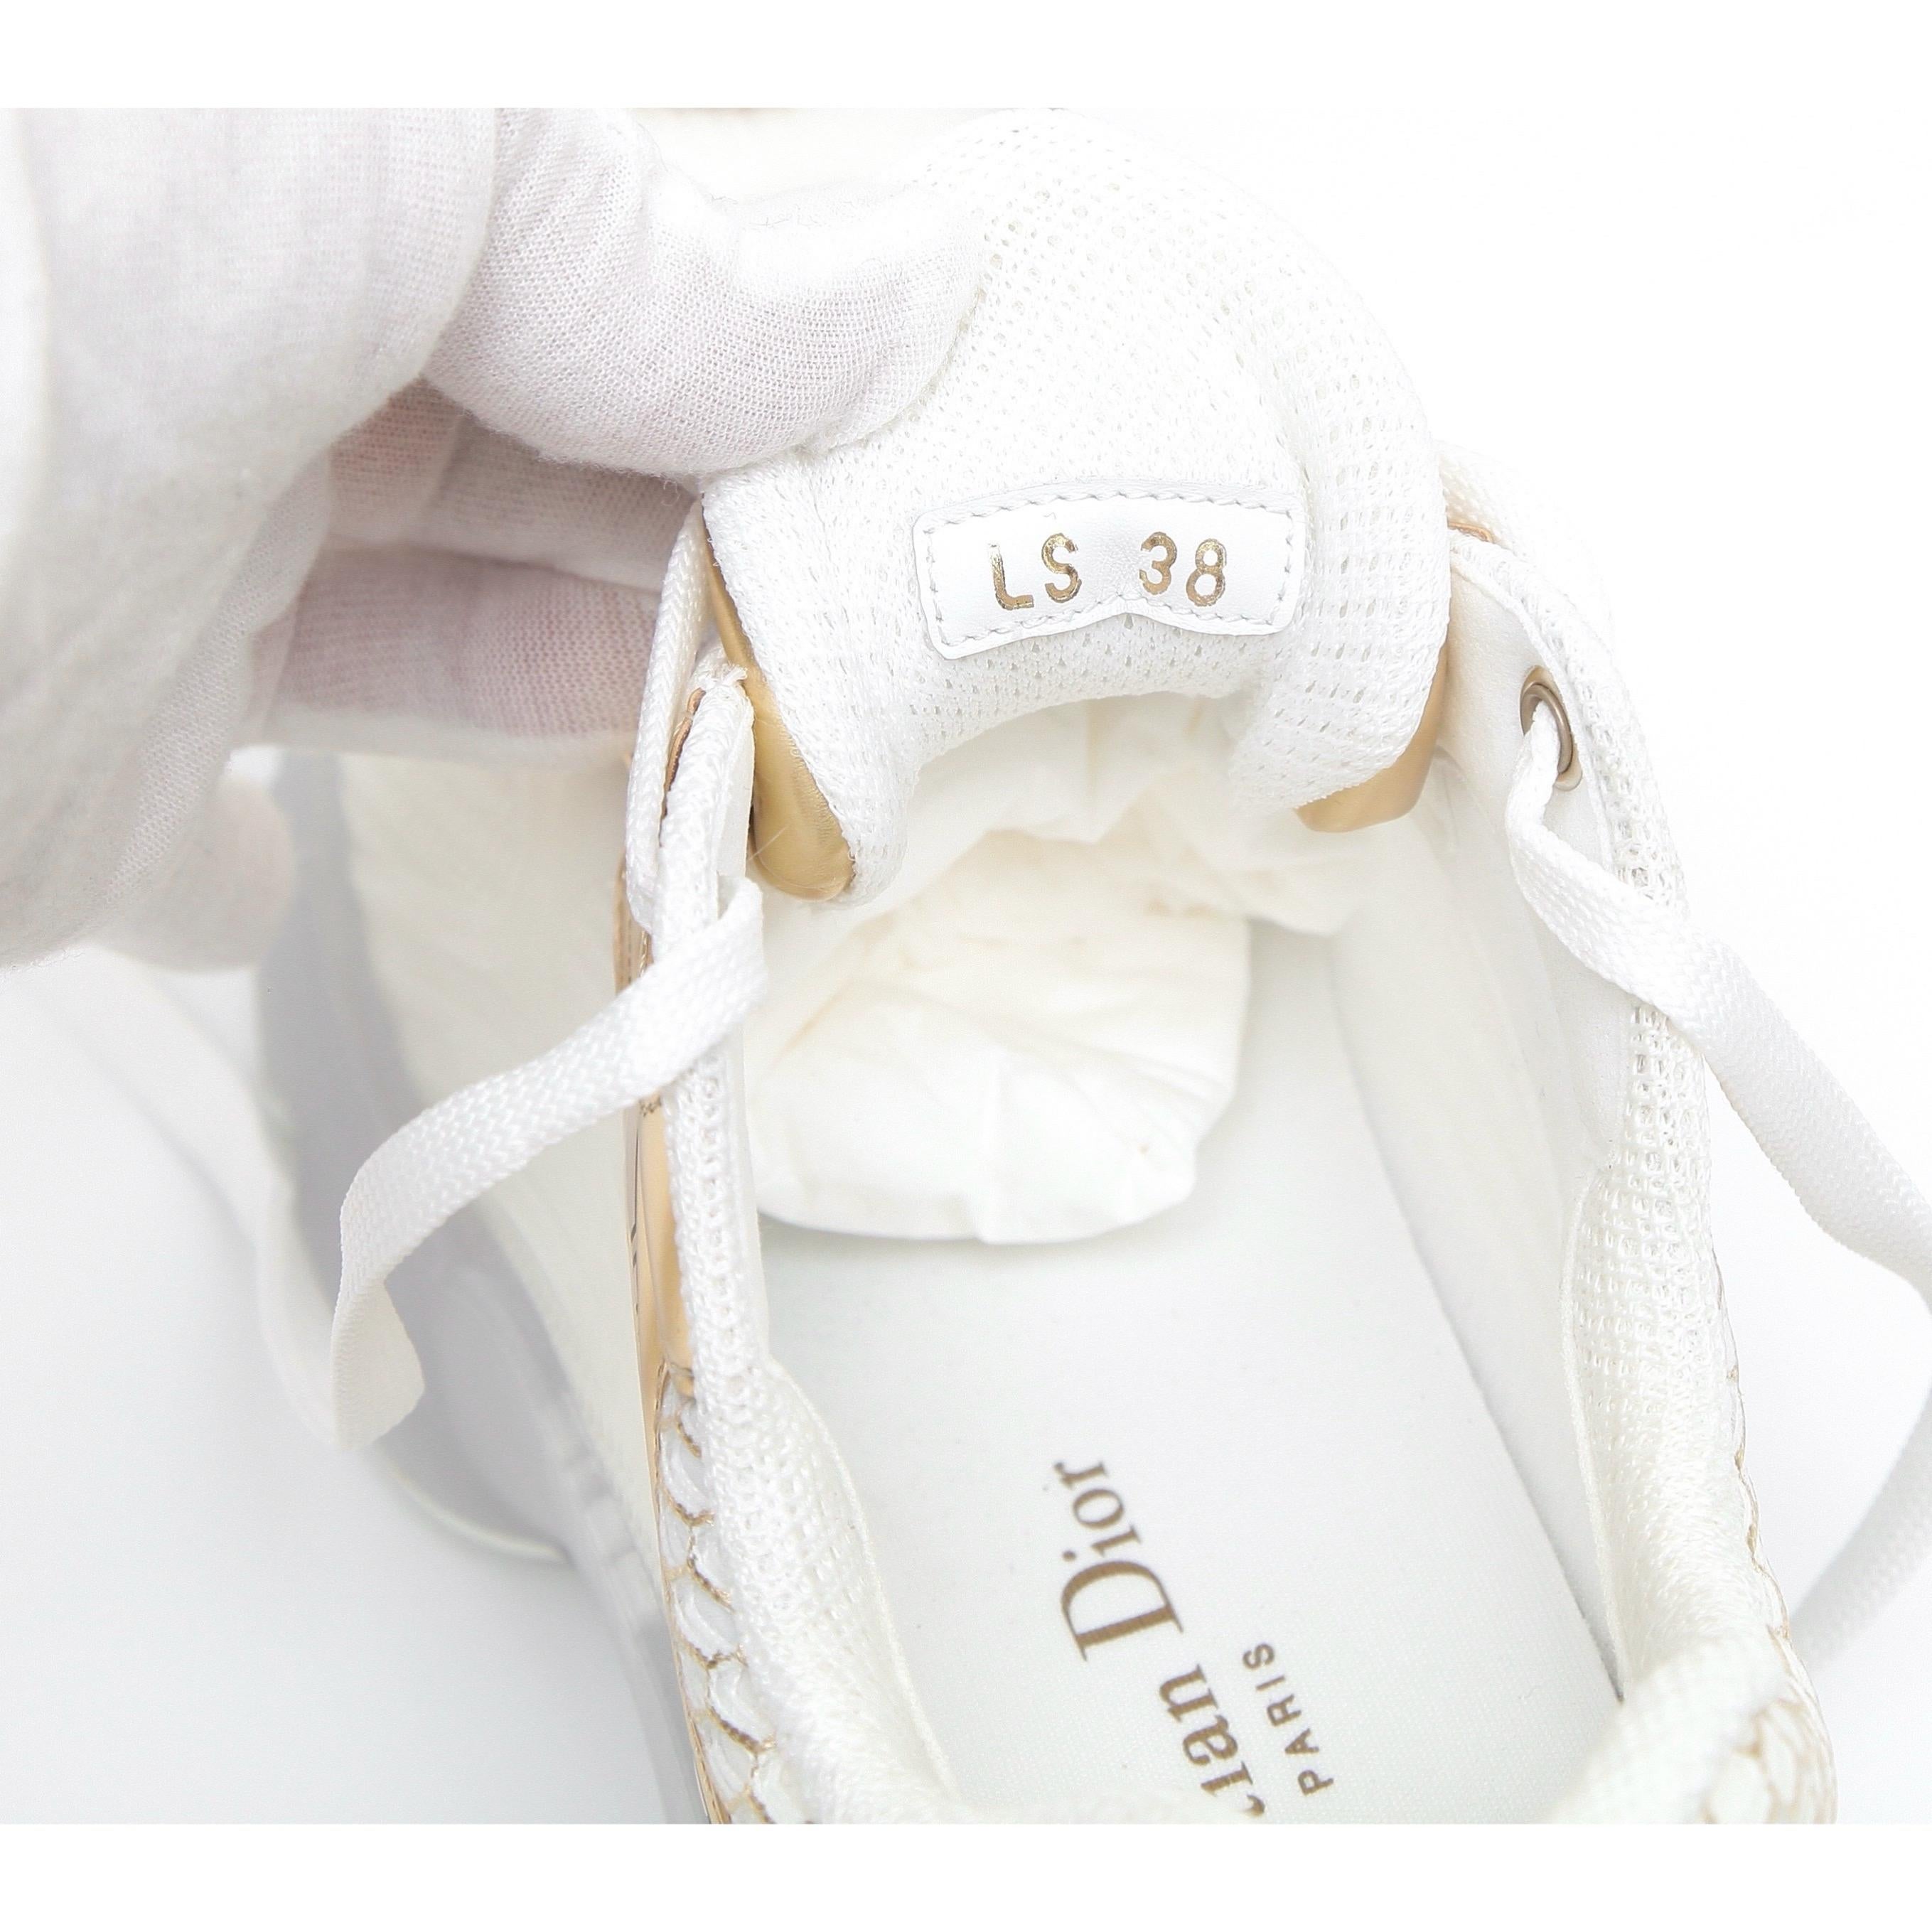 DIOR Sneakers Lace Up VIBE Trainer White Mesh Gold-Tone Star Rubber Sz 38 1